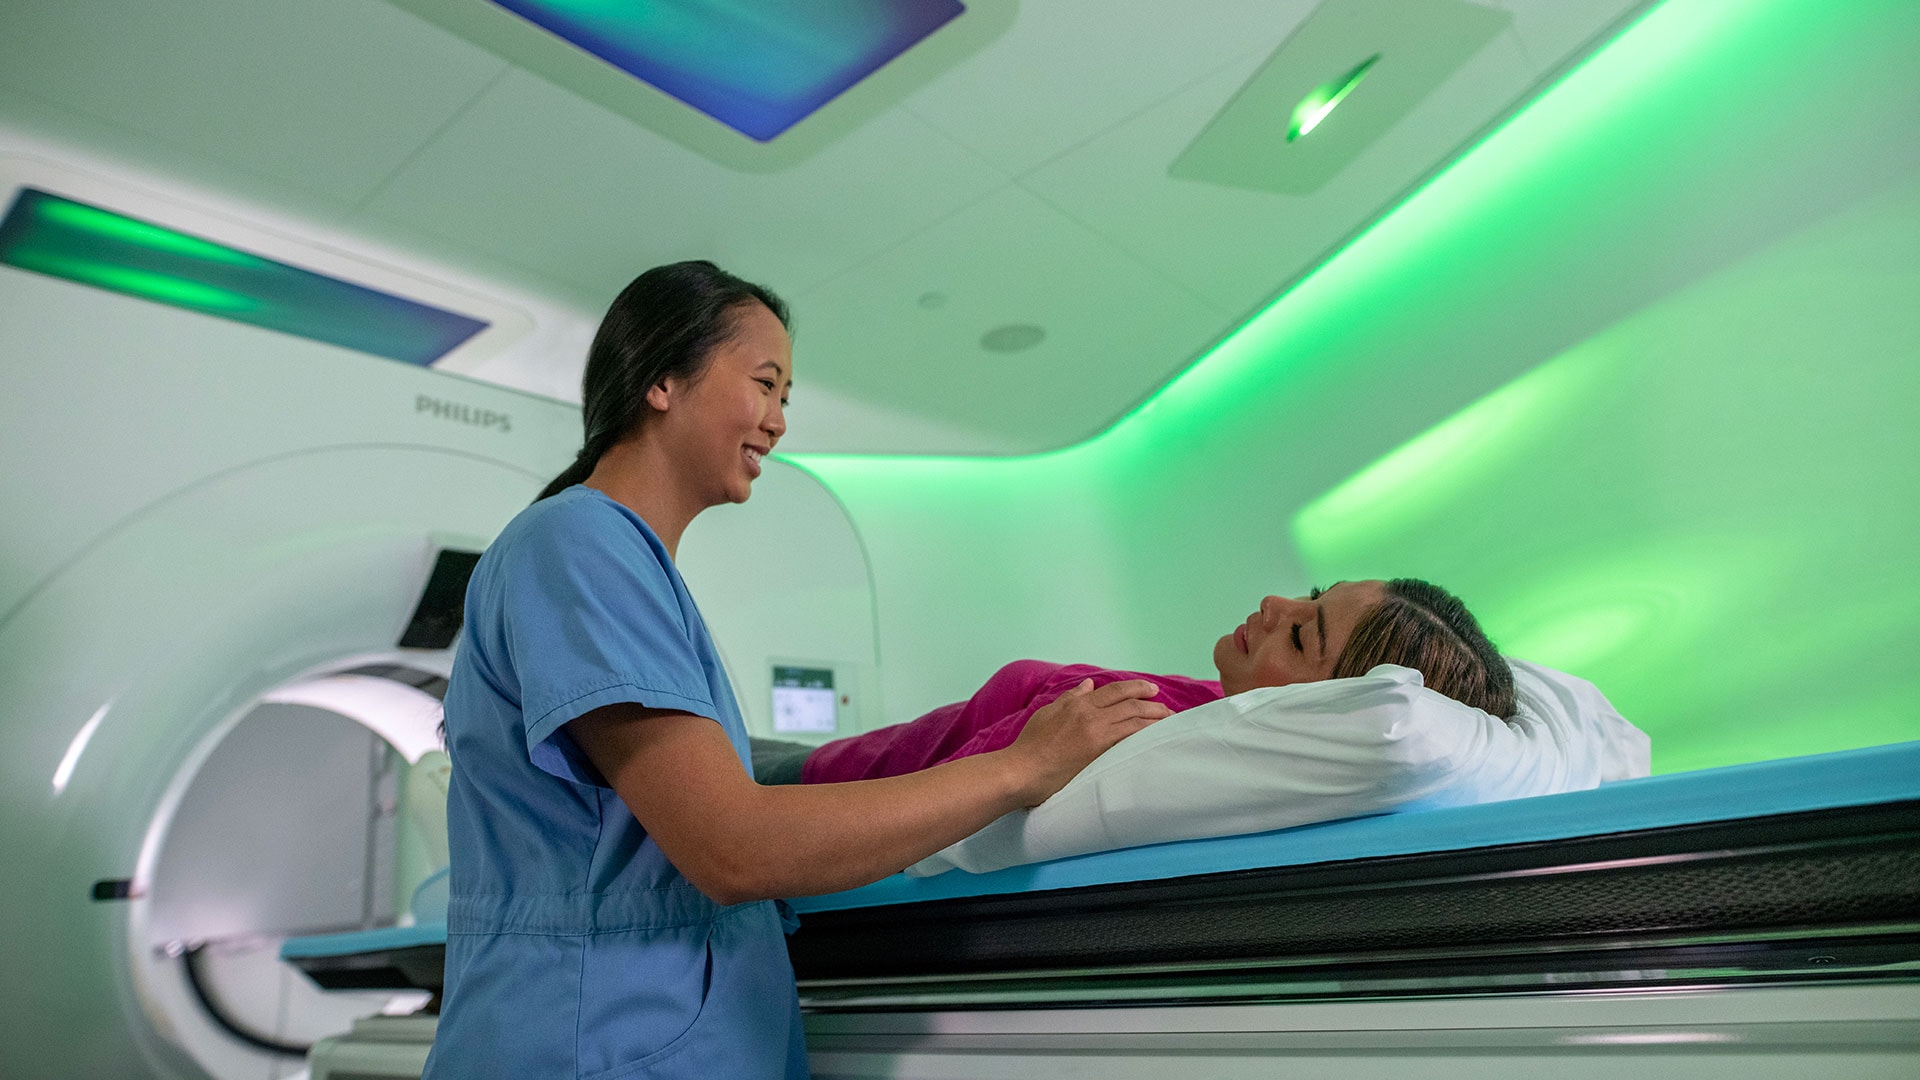 Philips Ambient CT7500 in use with a clinician and patient